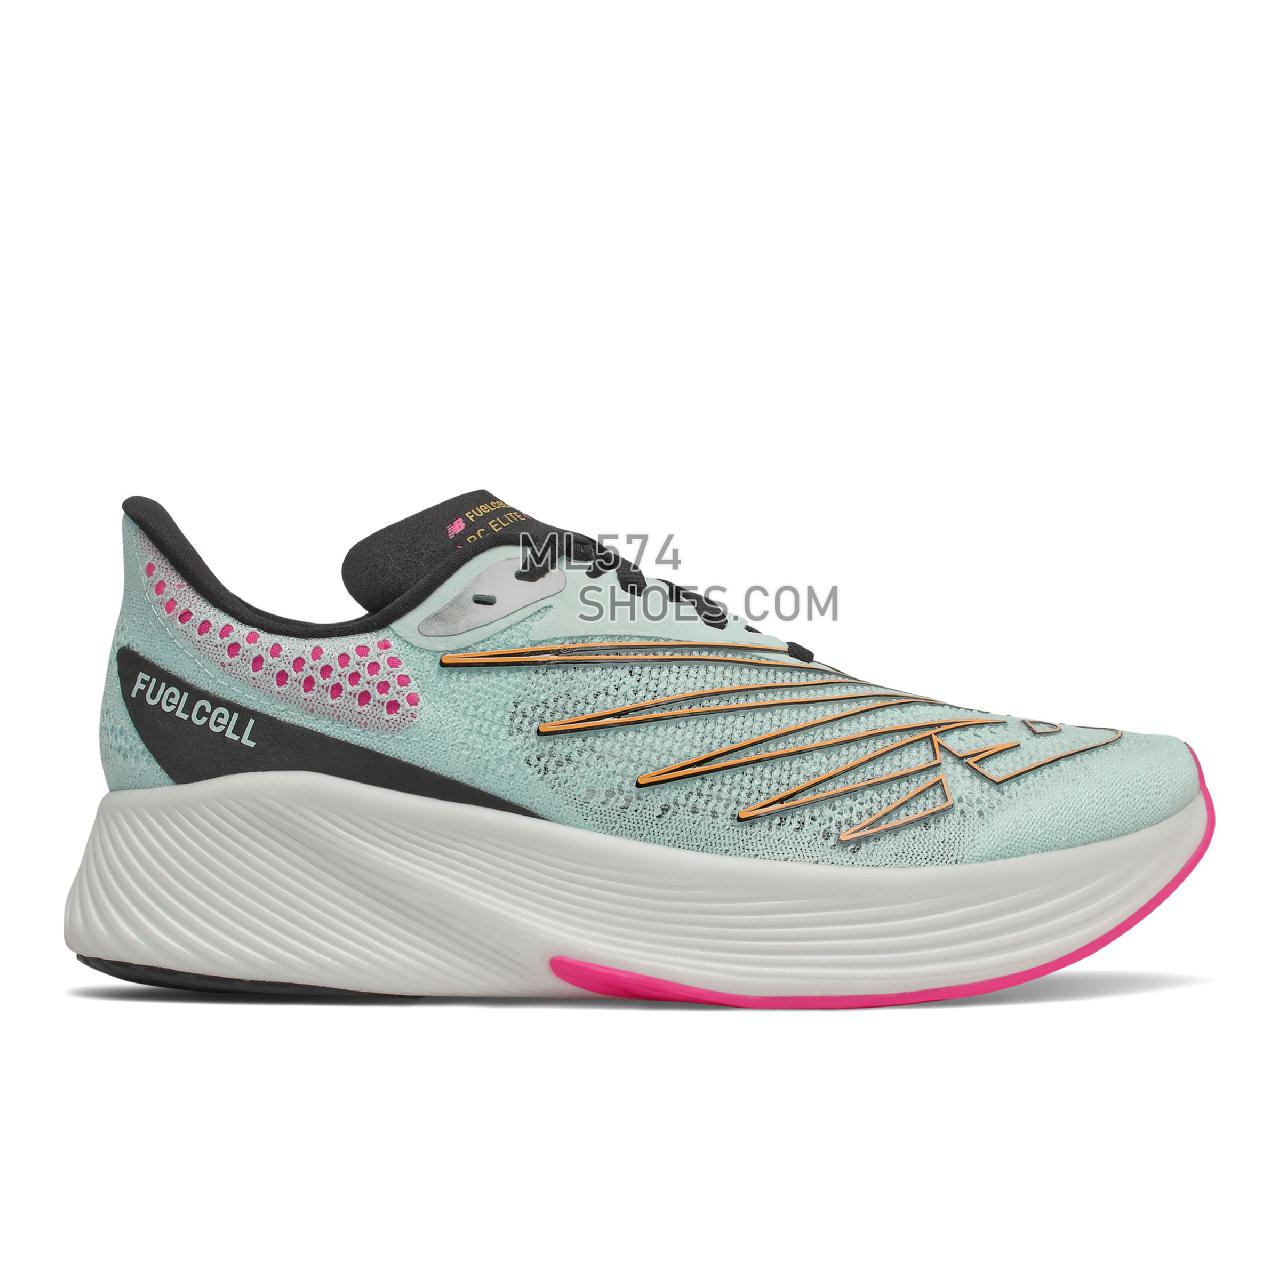 New Balance FuelCell RC Elite v2 - Women's Fuelcell Sleek And LightWeight - Pale Blue Chill with Deep Violet - WRCELSV2